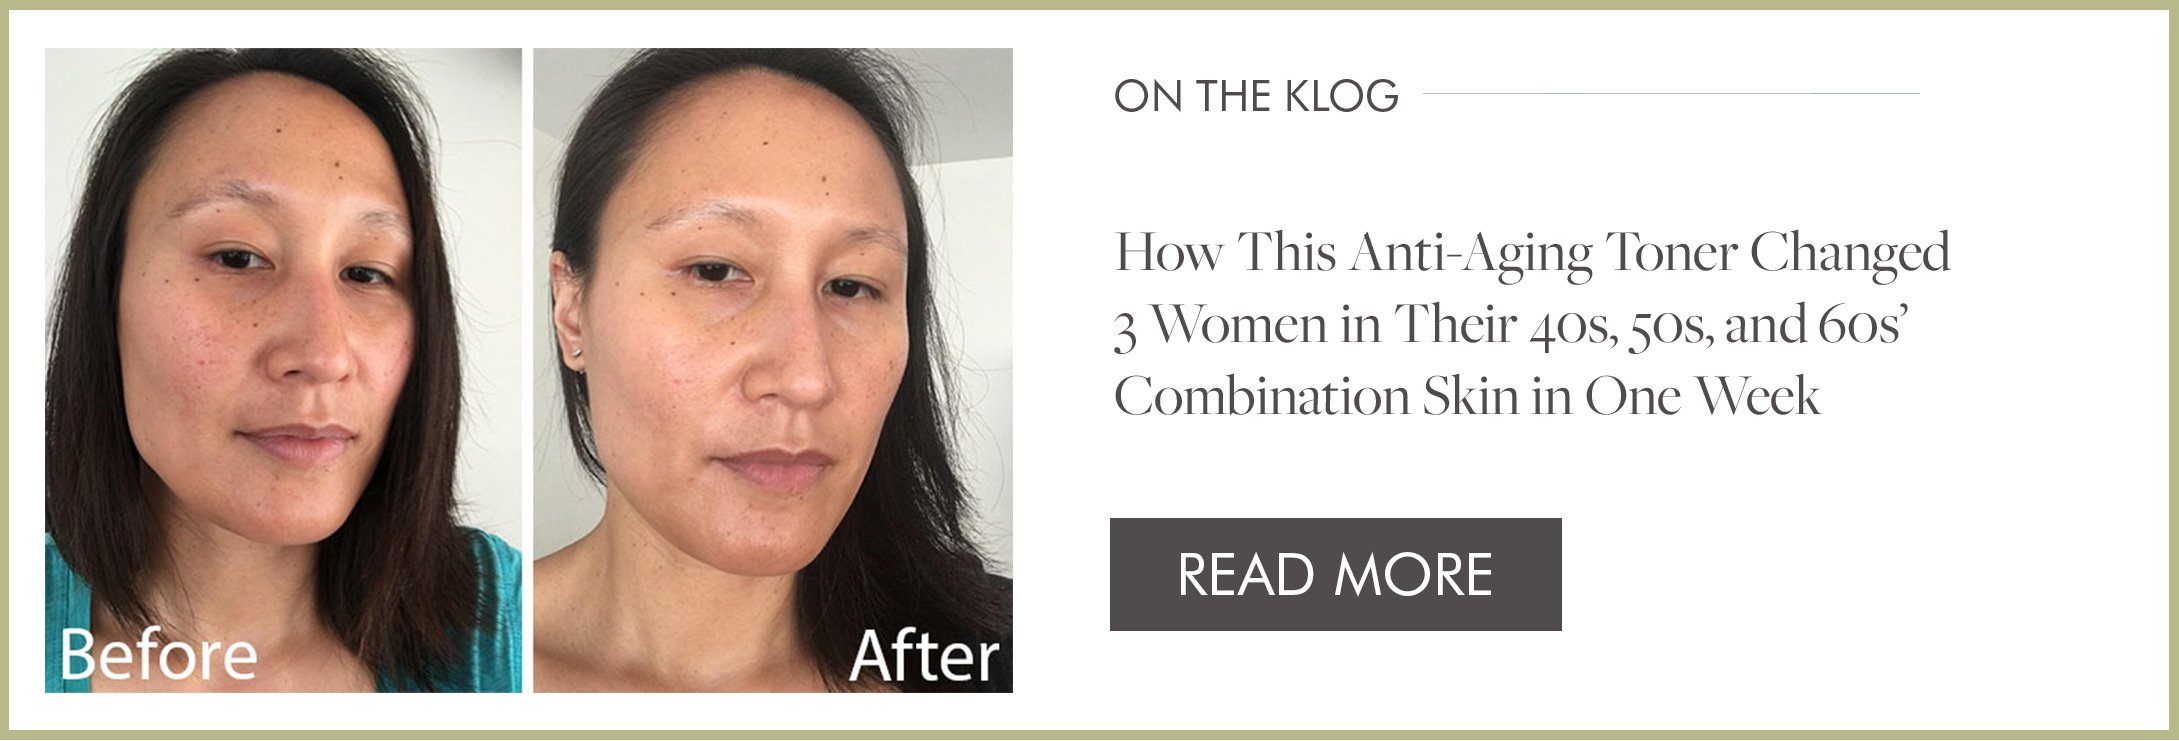 How anti aging toner changed womens combination skin in one week